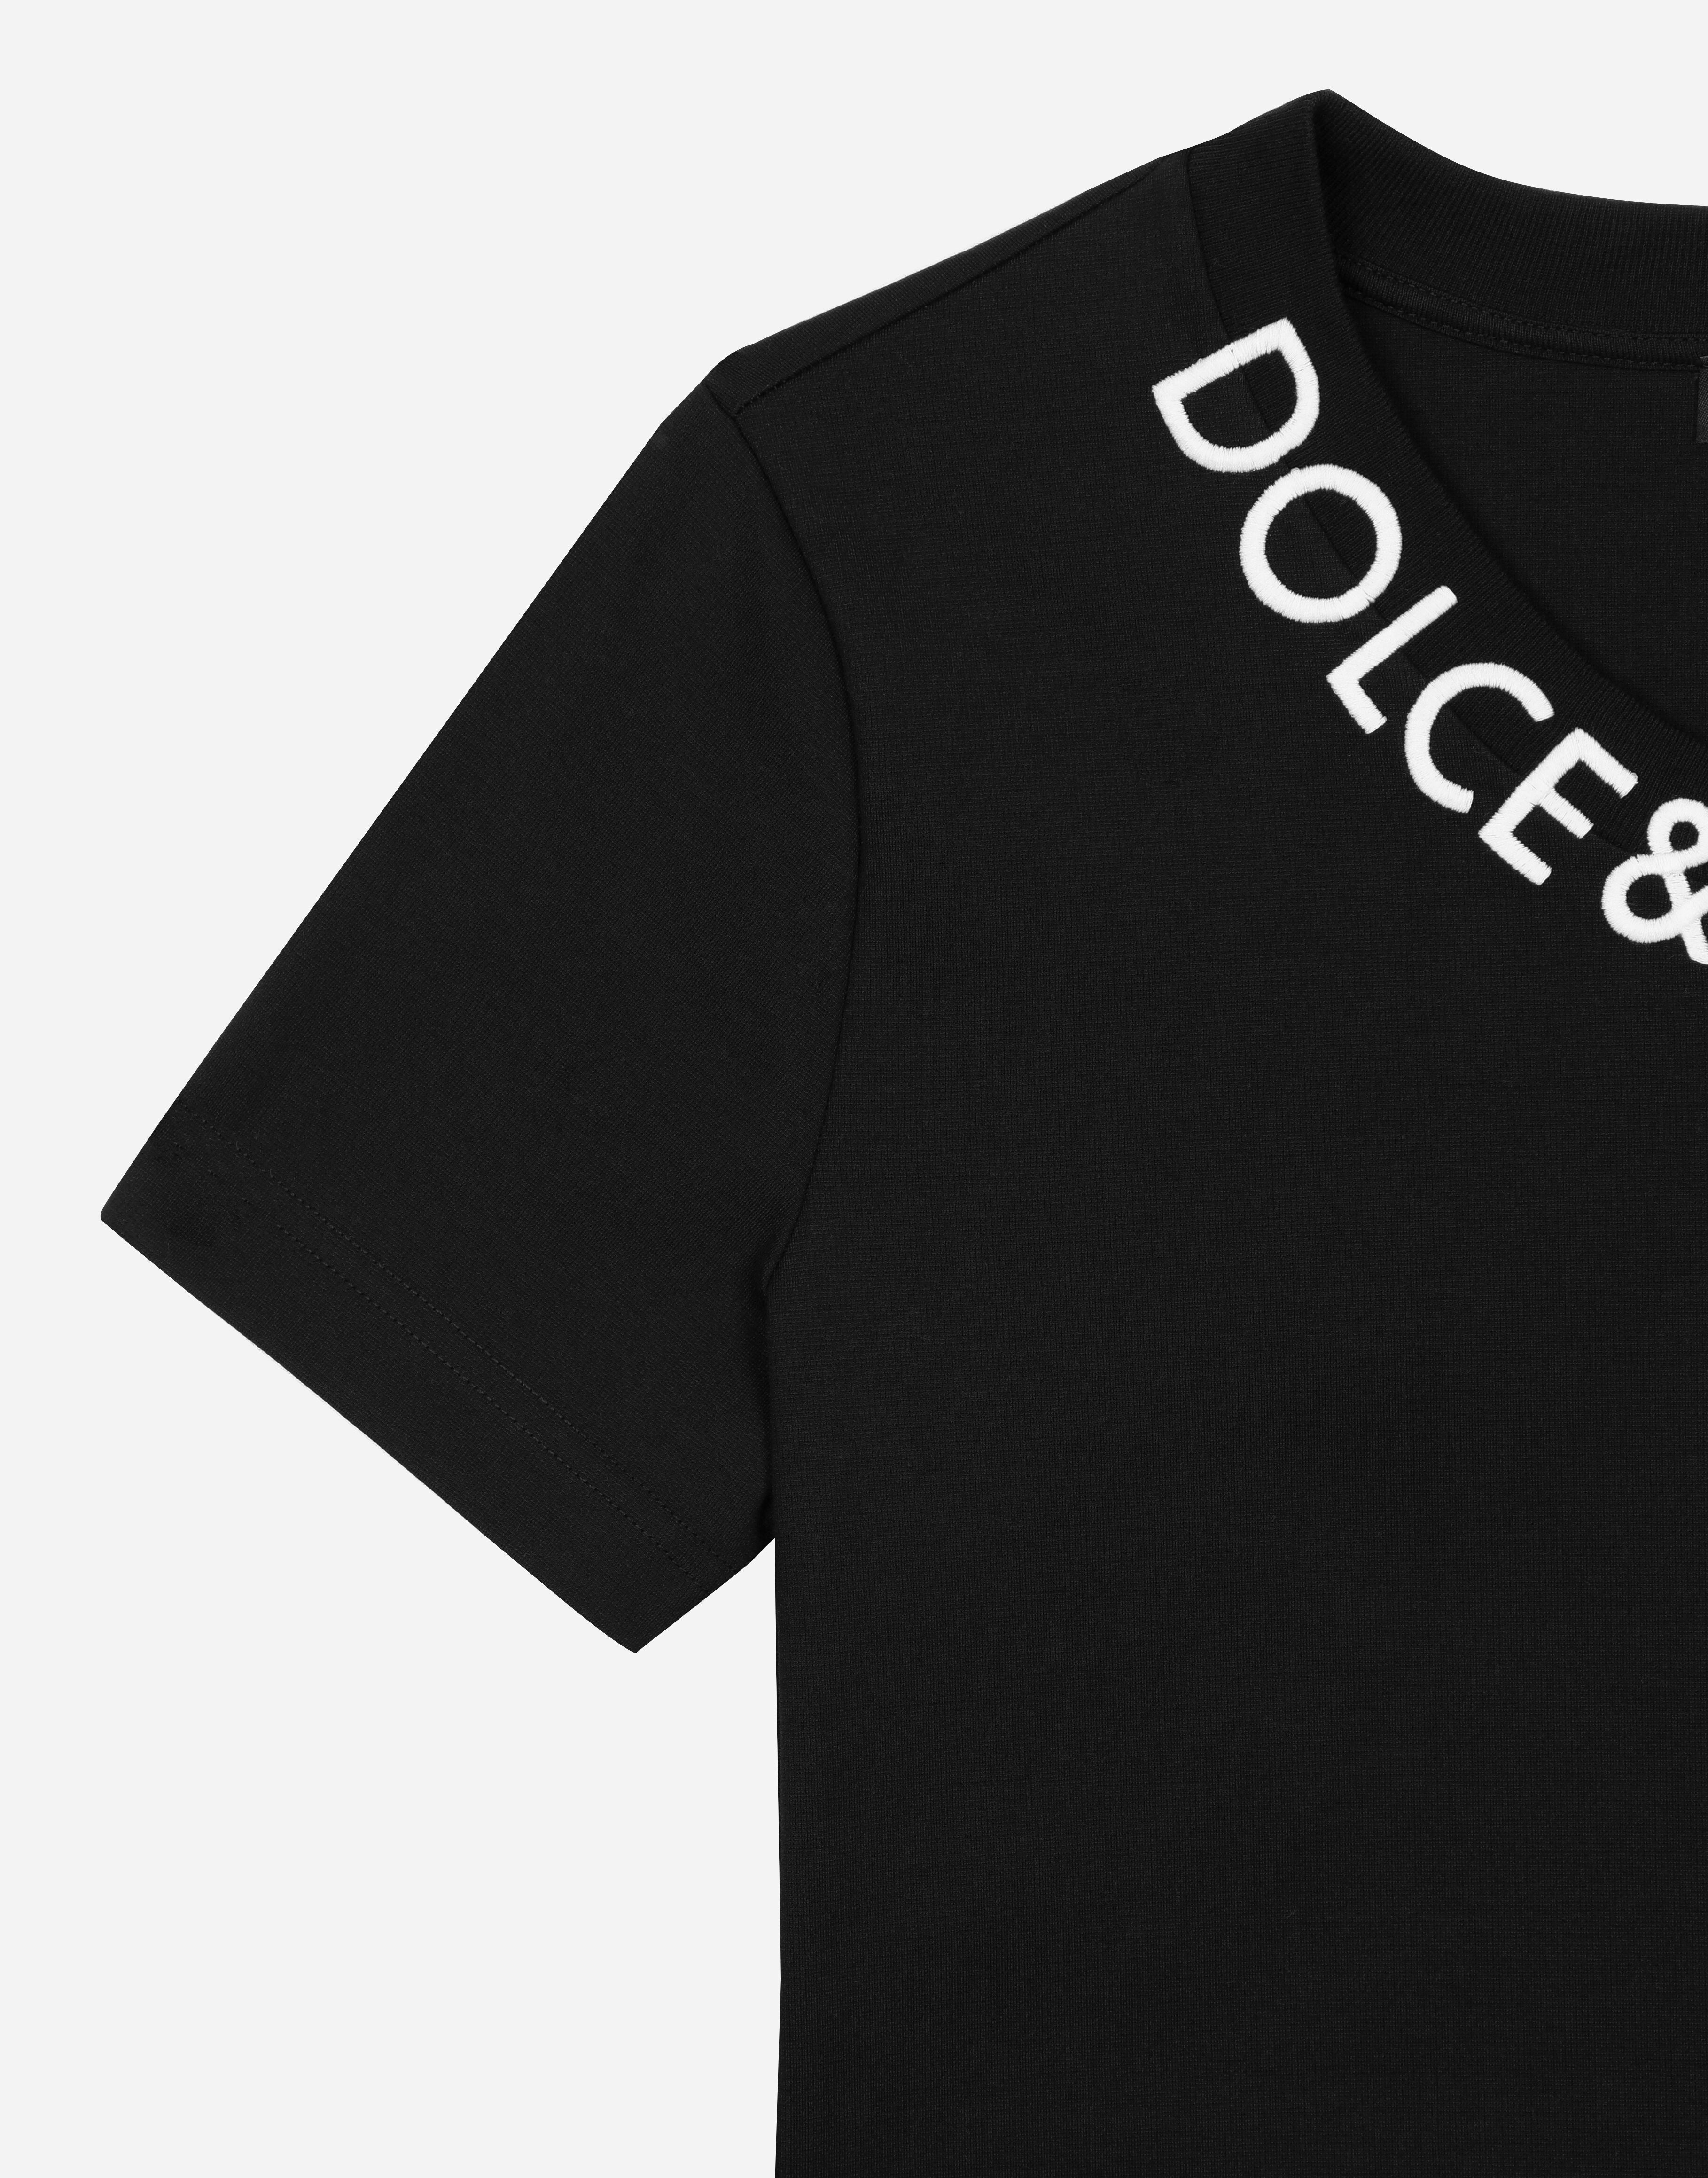 Jersey T-shirt with logo embroidery on neck in Black for